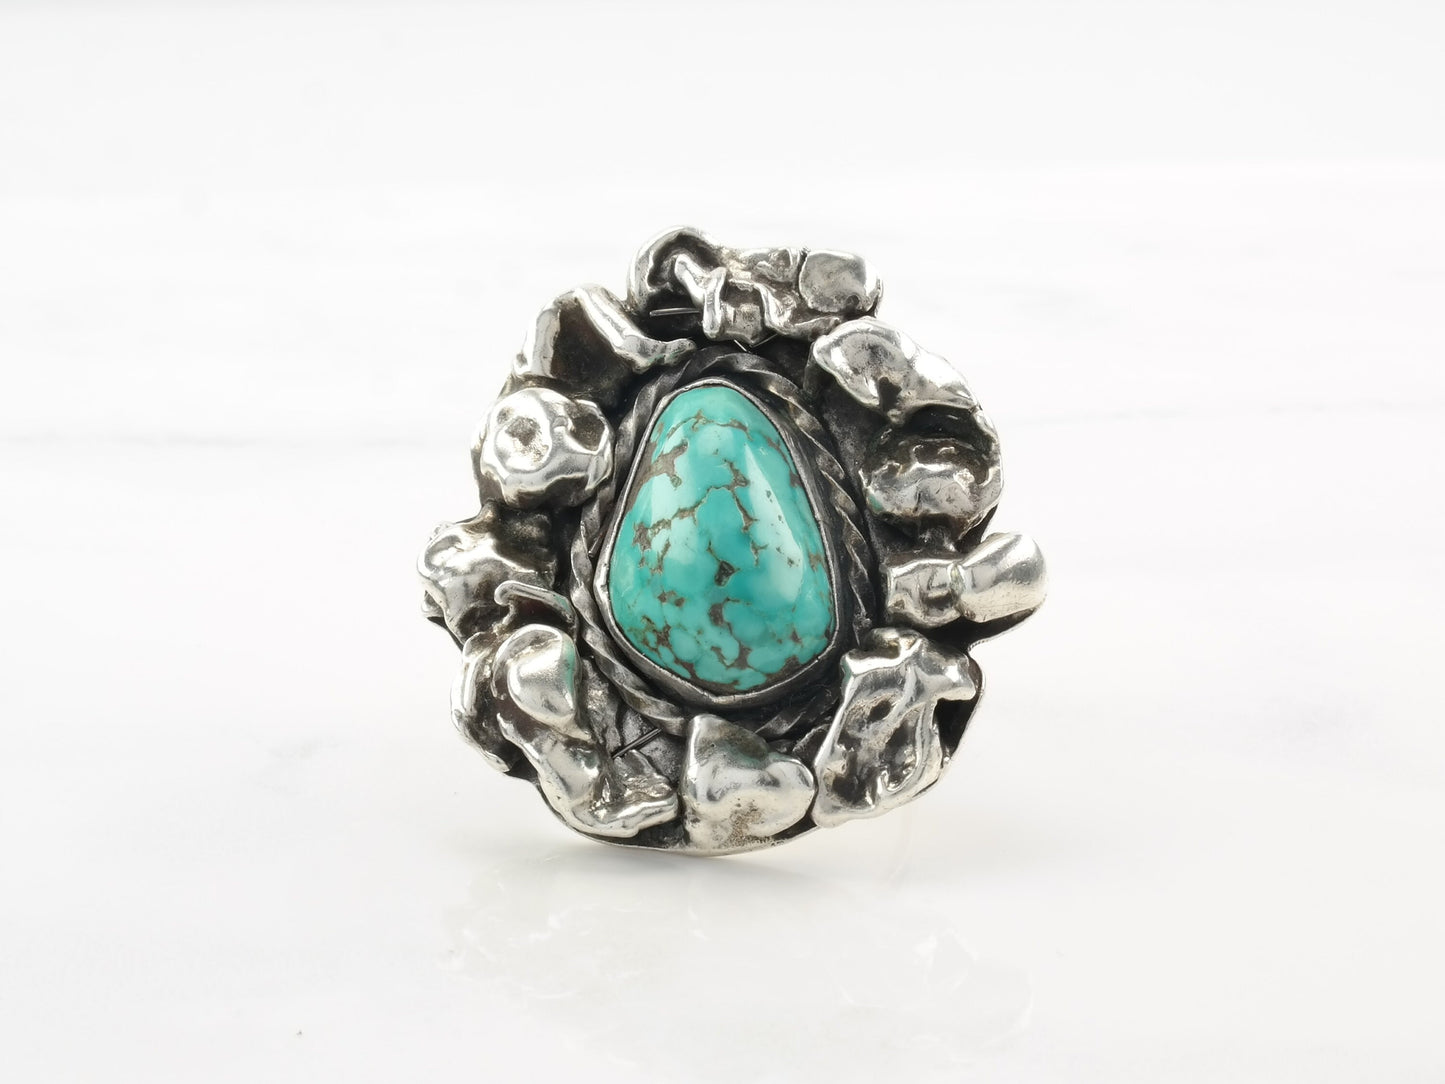 Vintage Southwest Silver Ring Turquoise Brutalist Style Sterling Size 8 1/2